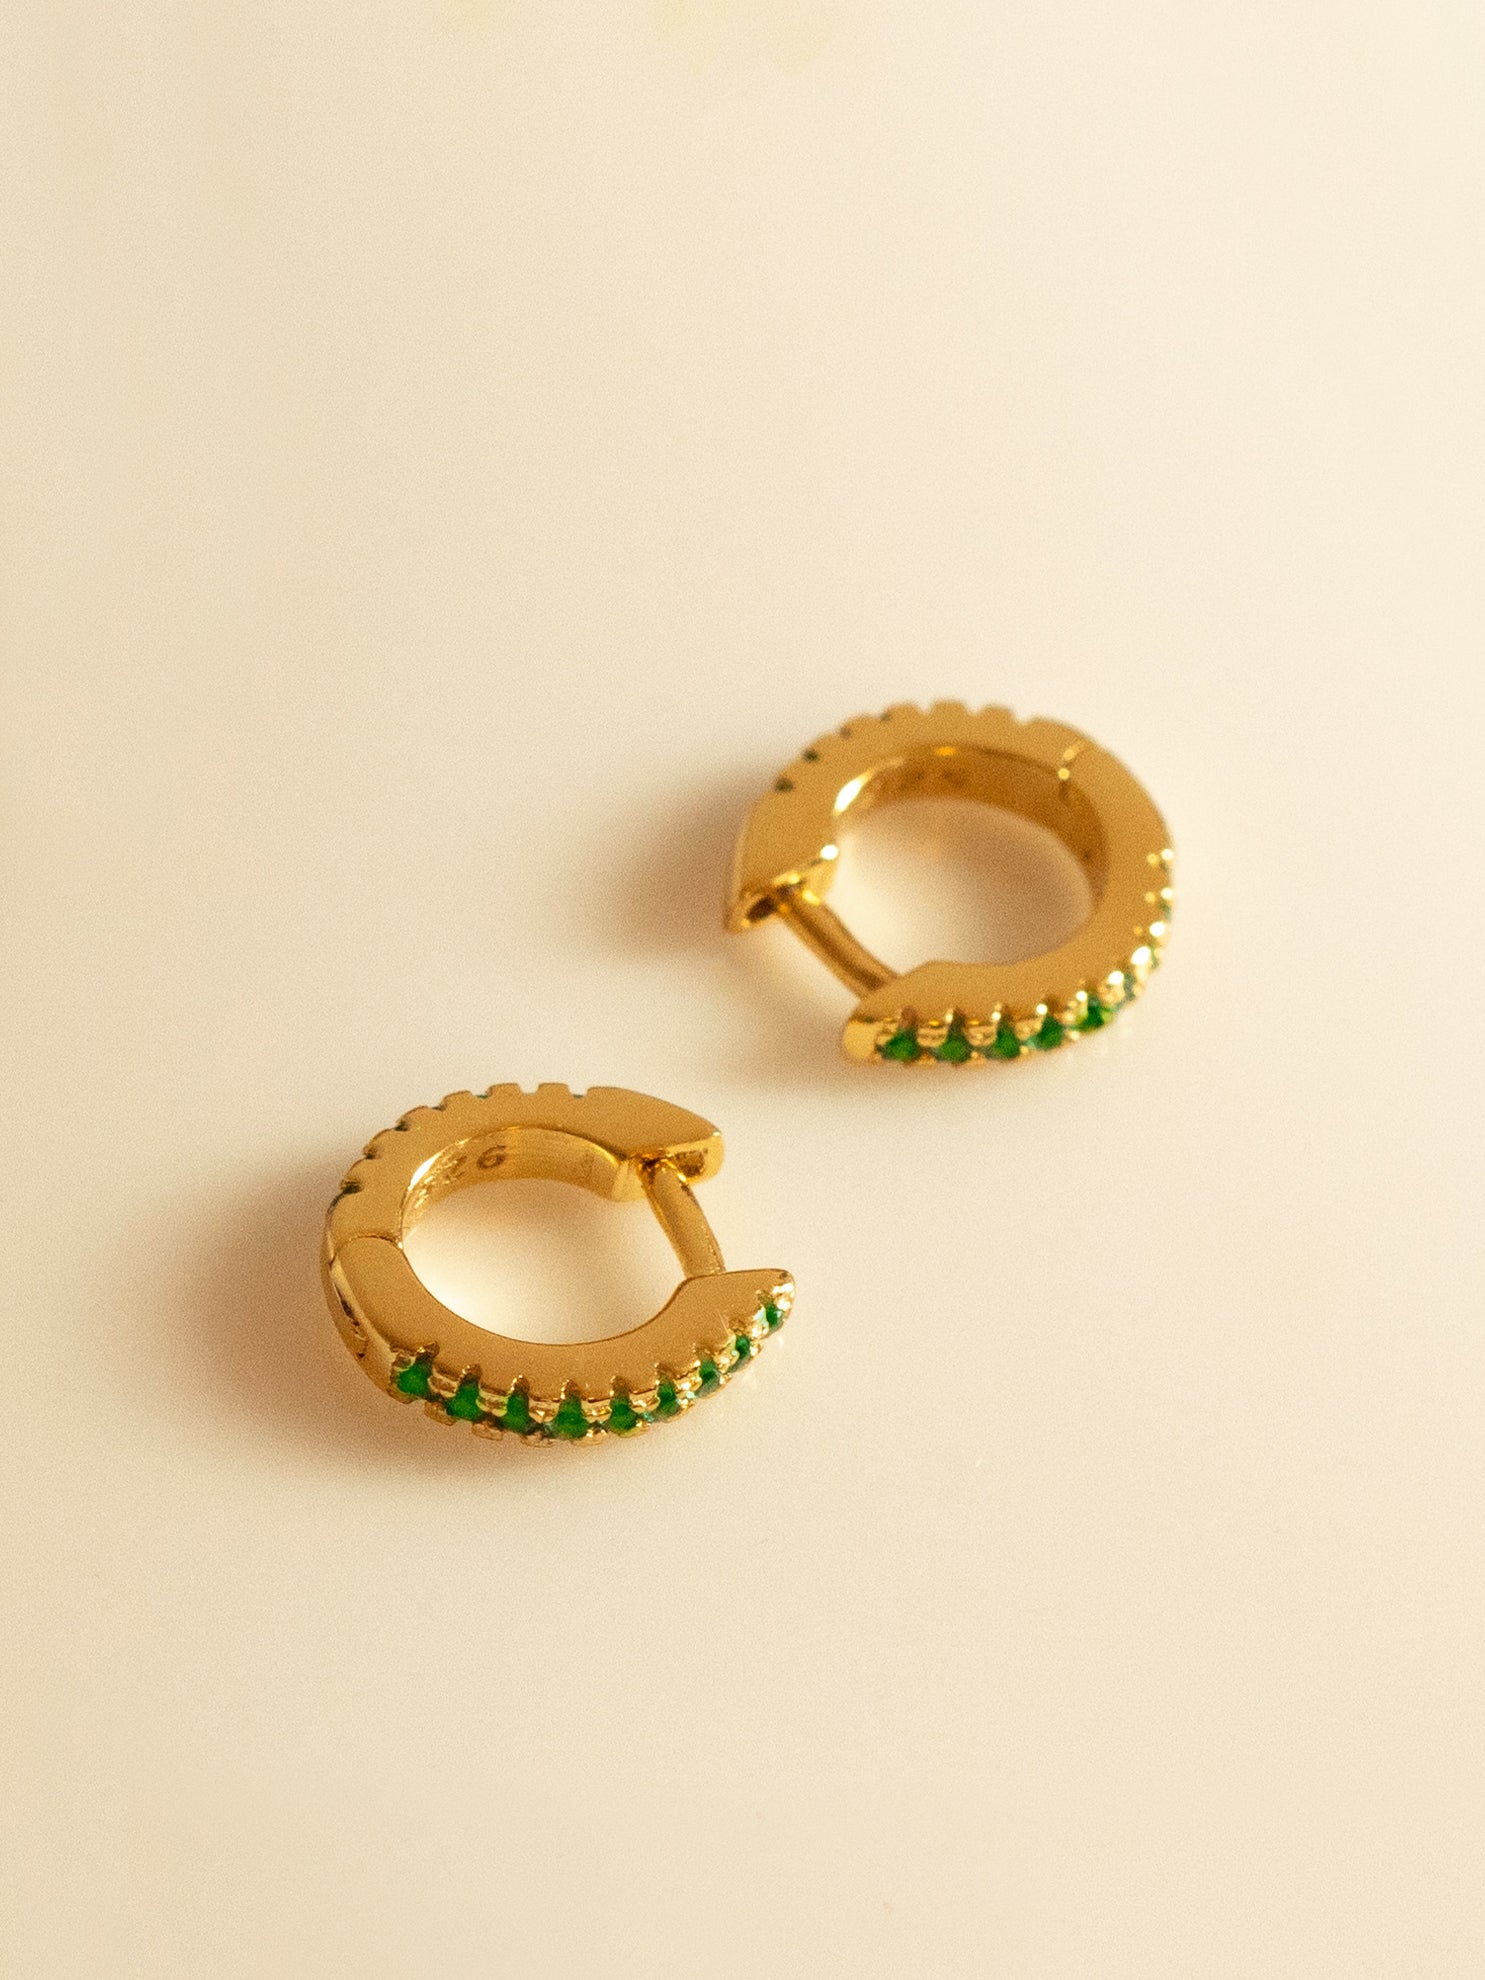 Gold Tiny Hoop Earrings With Green Stones For Helix, Upper Lobe, Tragus